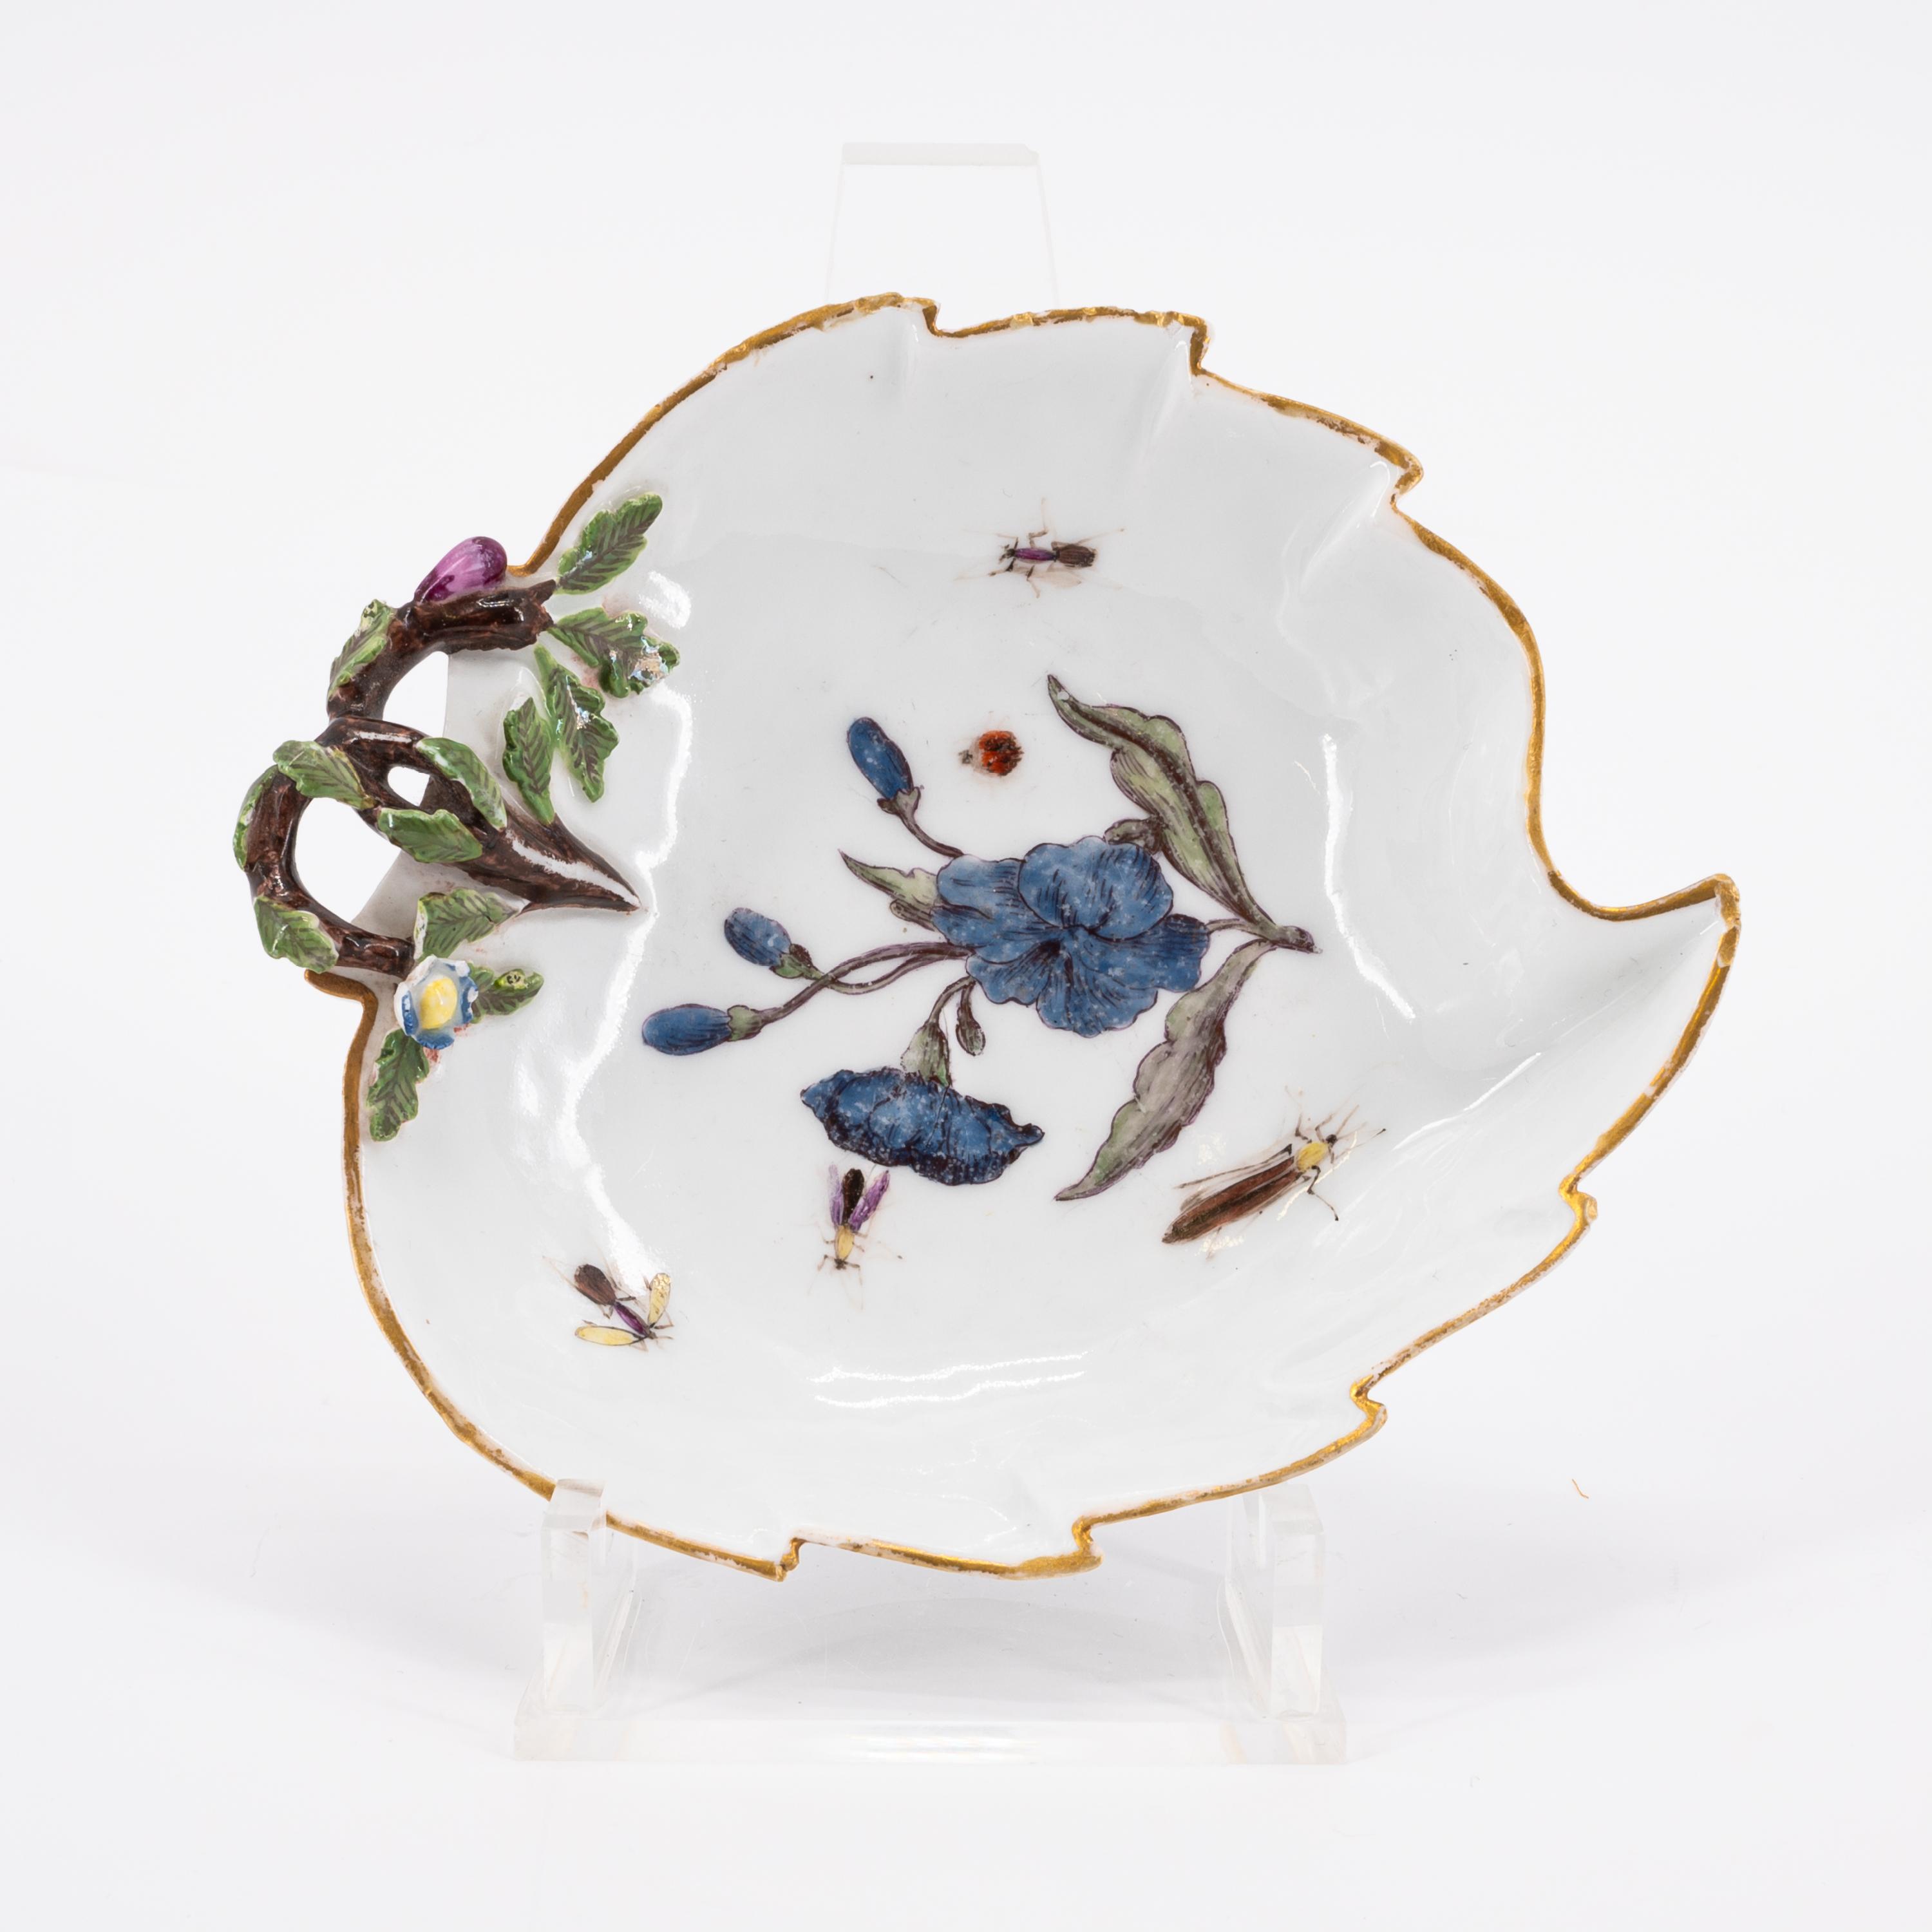 LARGE PORCELAIN LIDDED BOWL WITH FLOWER KNOB, SMALL TEA POT WITH WOODCUT FLOWERS AND CUP WITH SAUCER - Image 17 of 18